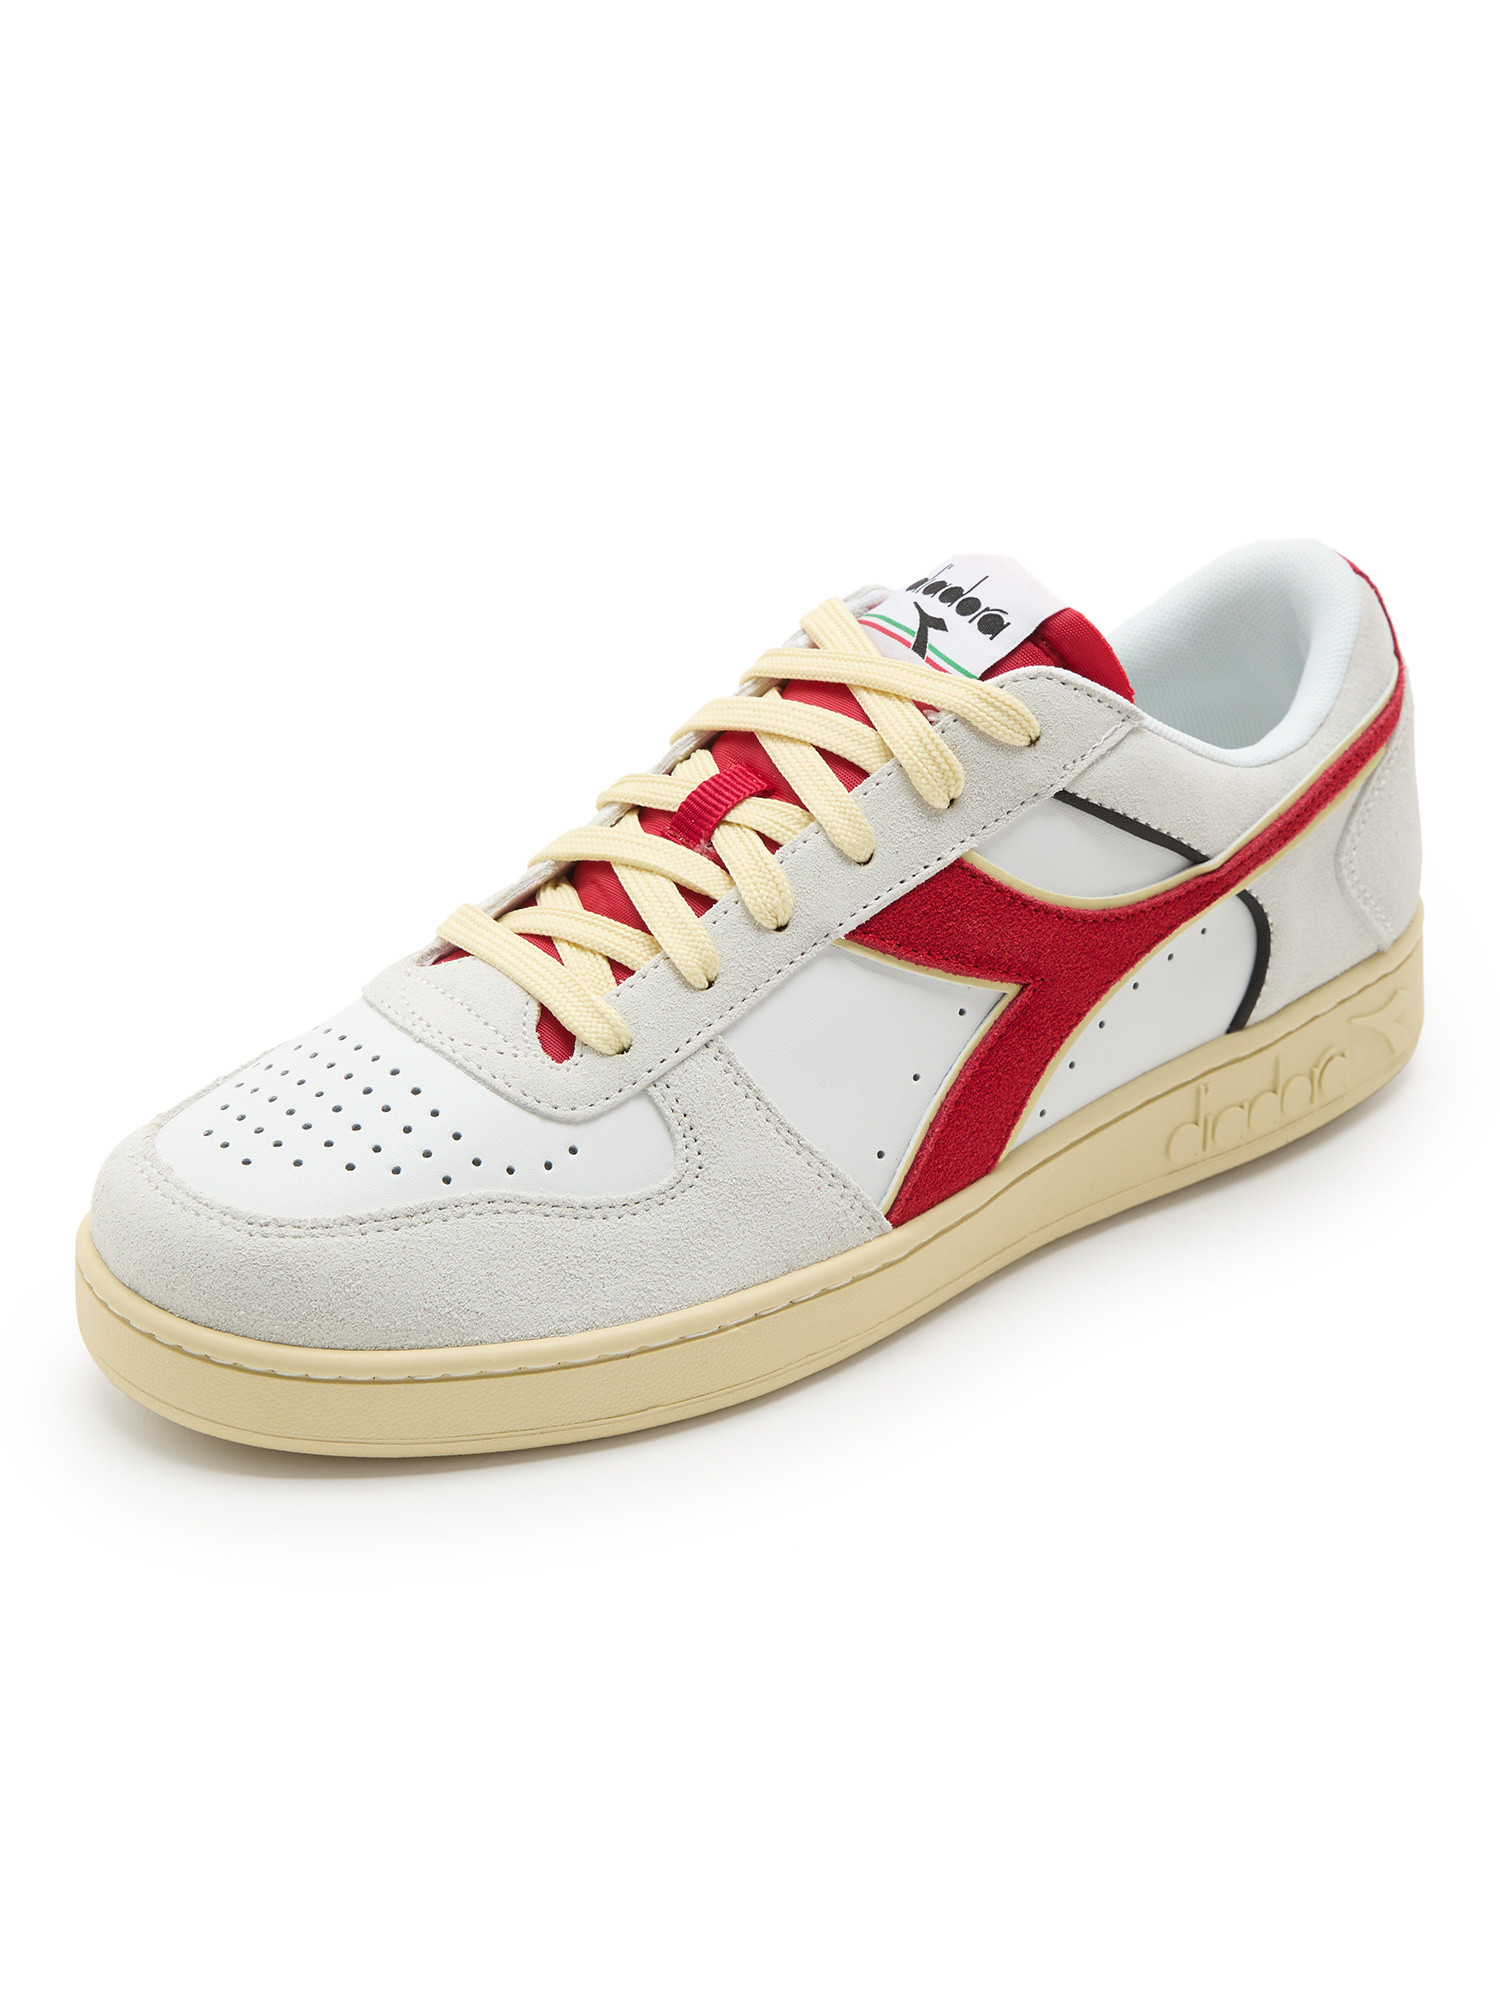 Diadora - Magic Basket Low Suede Leather Shoes, White, large image number 1